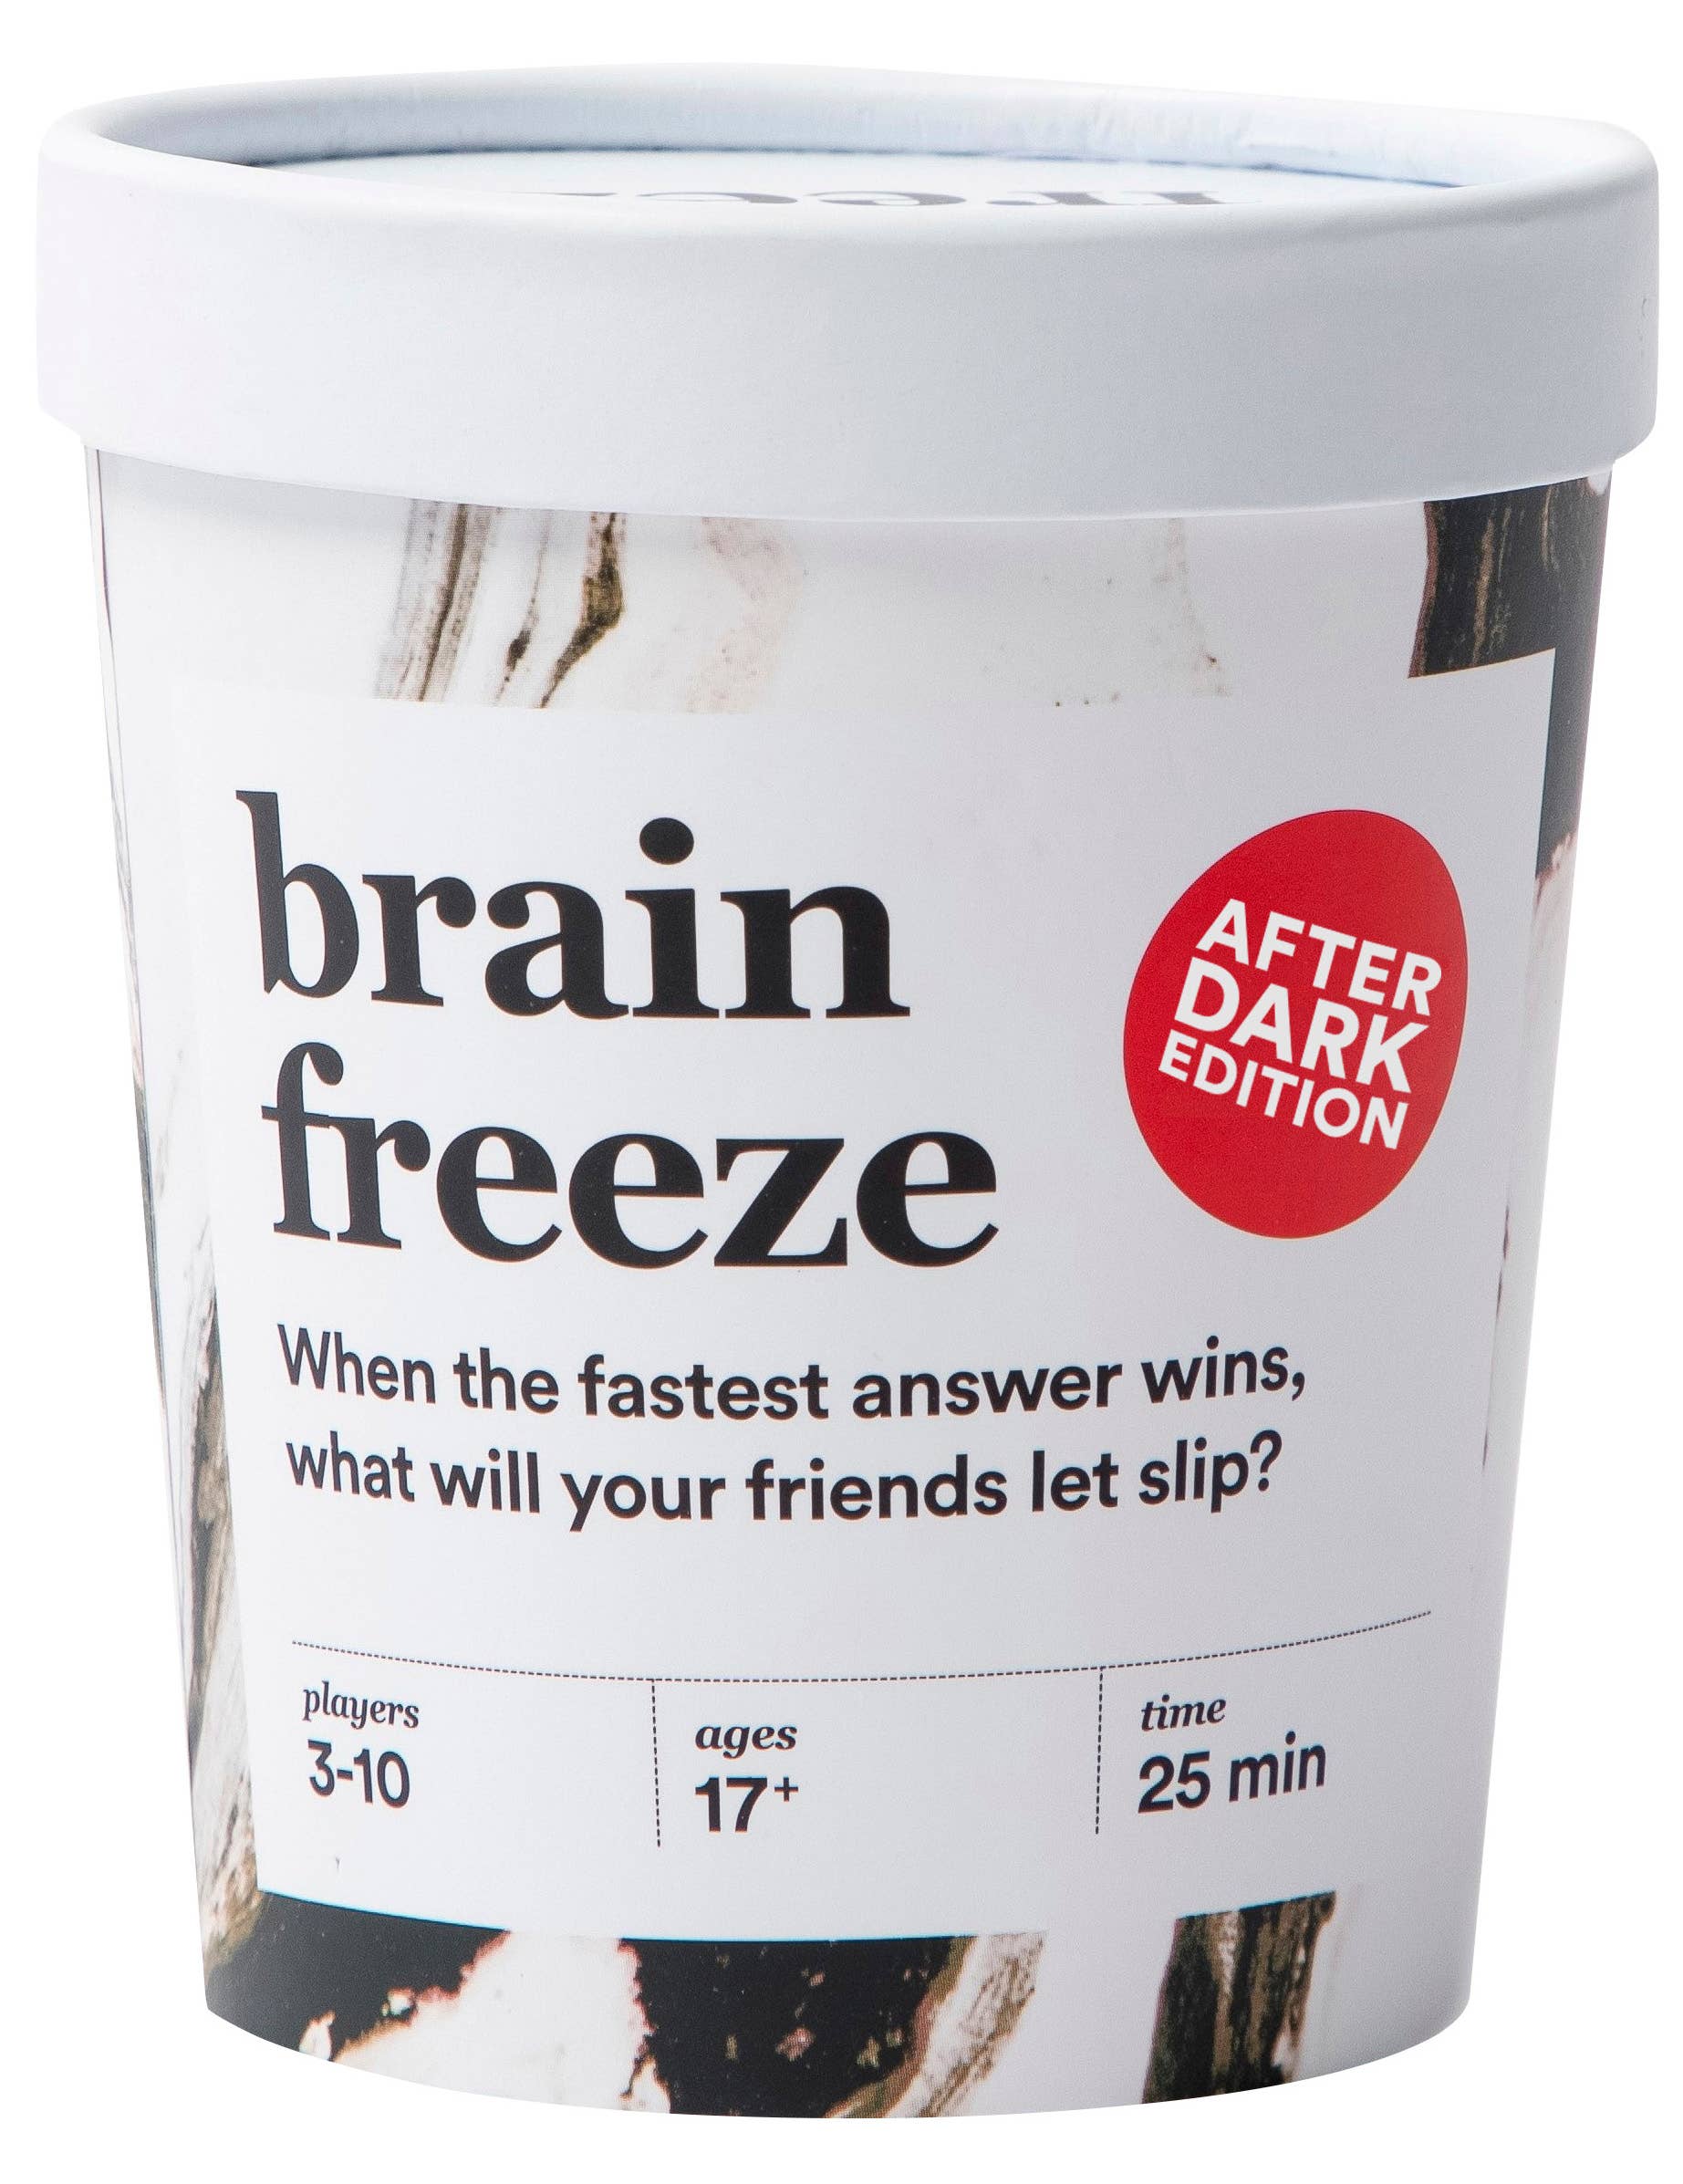 Wholesale　store　After　Party　Faire　BRAIN　Game　Edition　for　FREEZE:　Dark　Card　–　Adult　your